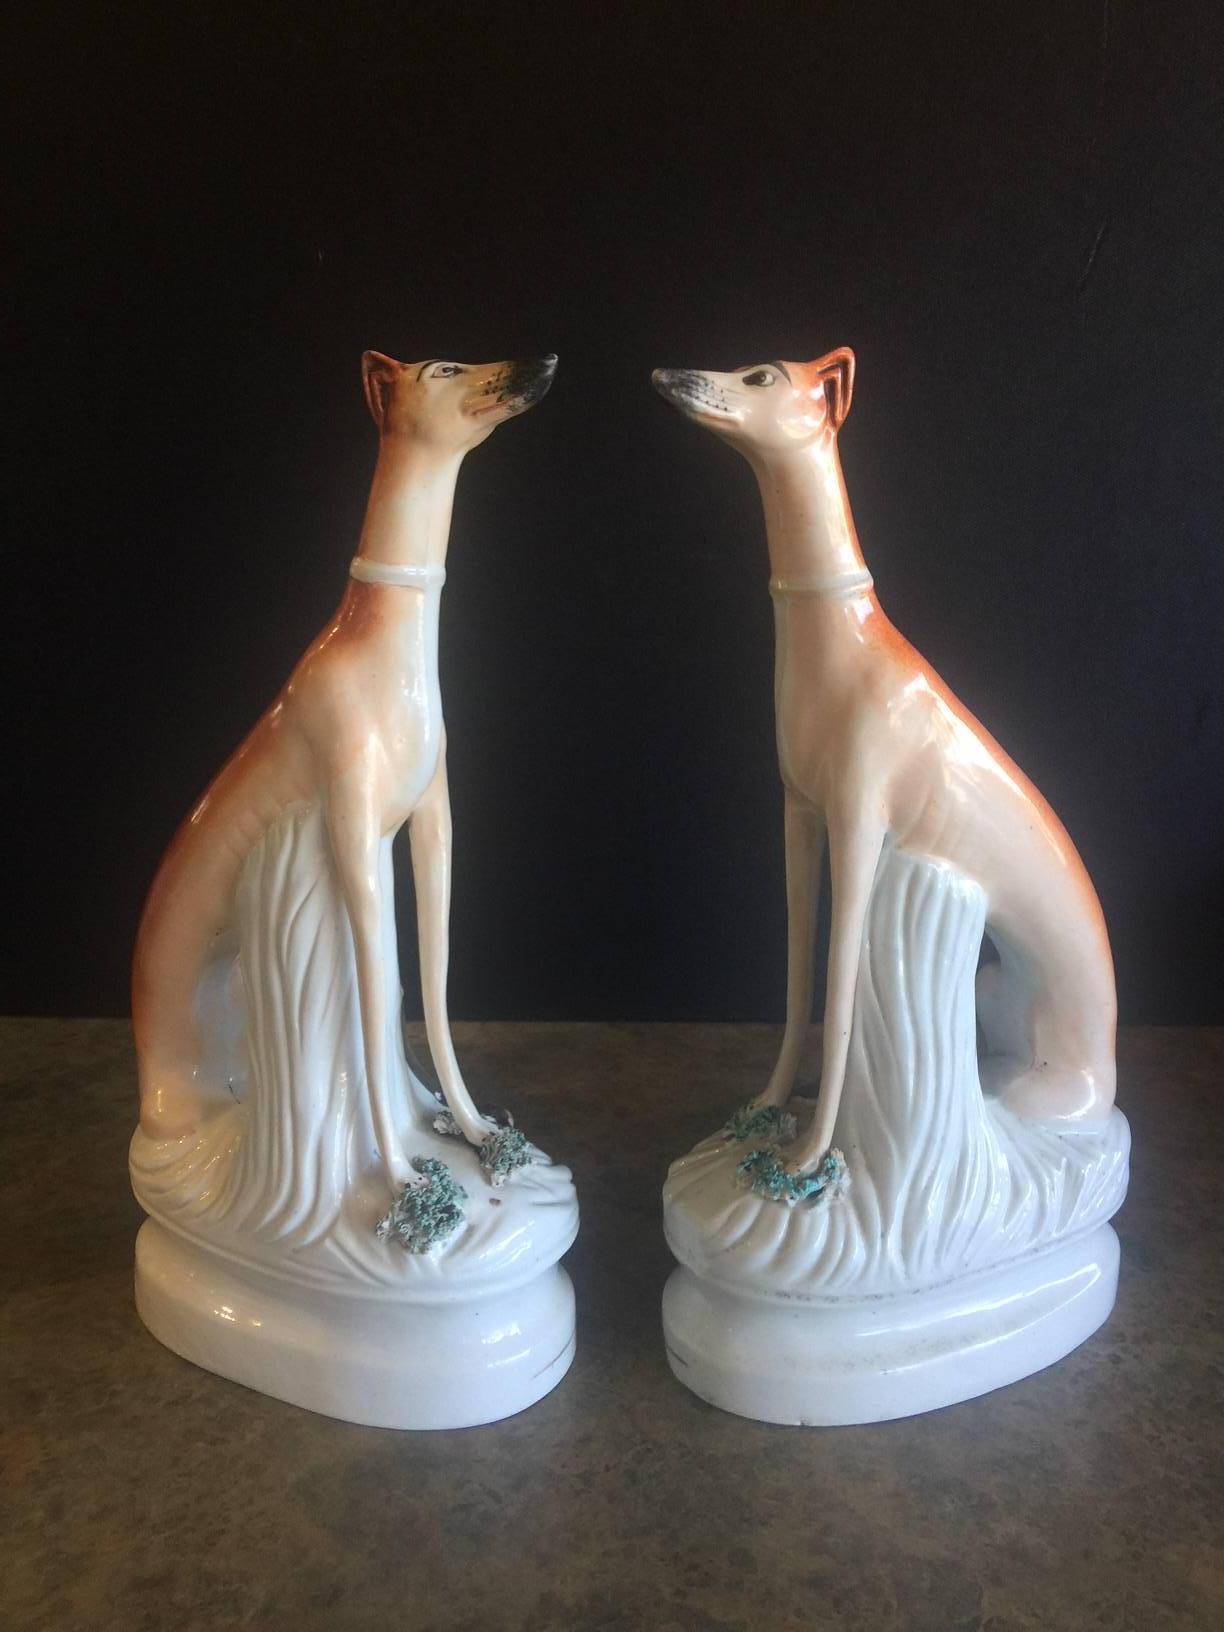 Hand-Painted Pair of 19th Century Porcelain Greyhound/Whippet Figurines by Staffordshire